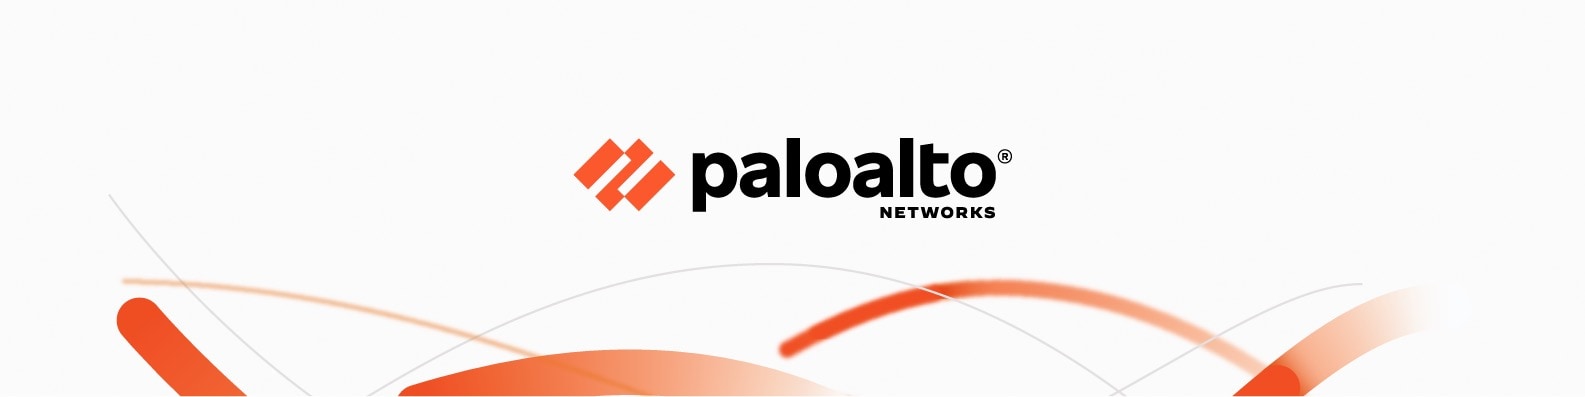 Our March 6 COVID-19 Guidance for Palo Alto Networks Employees